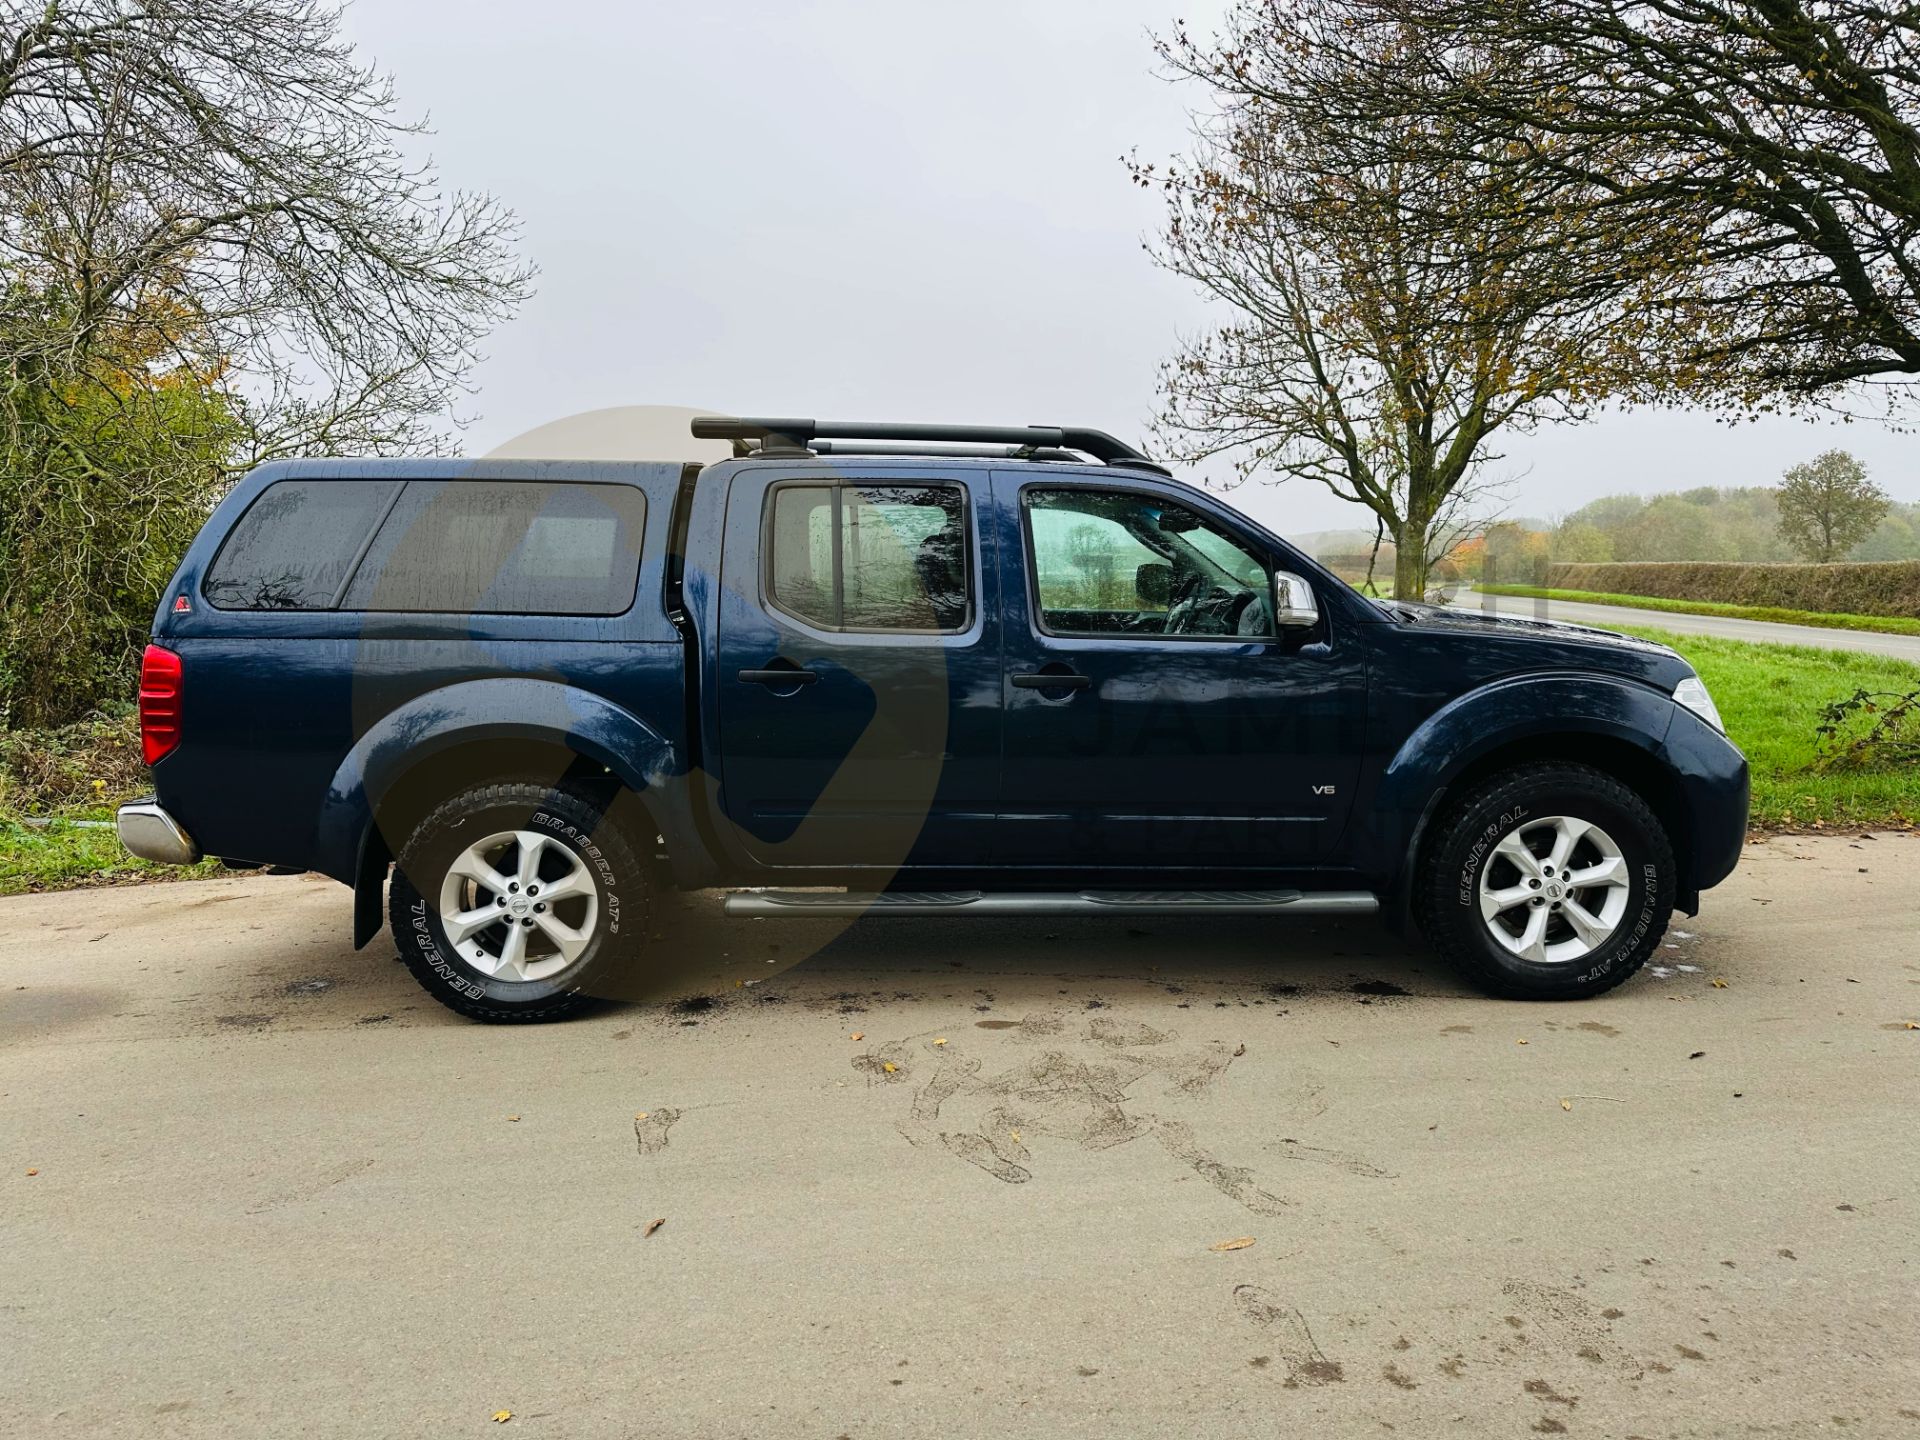 (ON SALE)NISSAN NAVARA *OUTLAW EDITION* 3.0 V6 TURBO DIESEL AUTOMATIC DOUBLE CAB PICKUP - 11 REG - Image 18 of 43